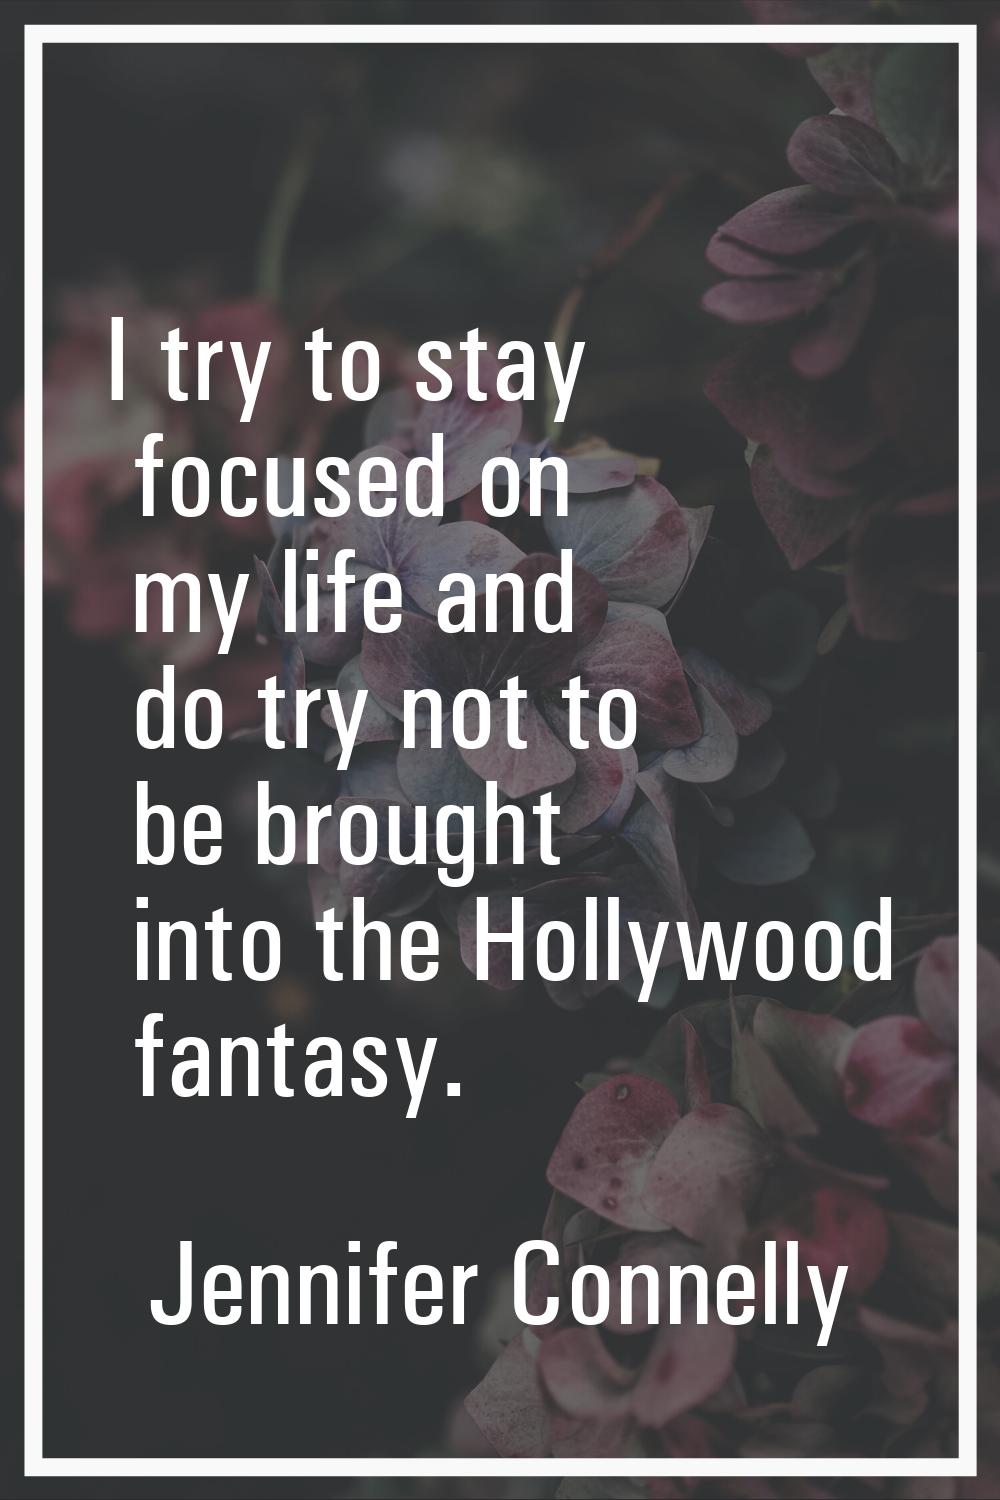 I try to stay focused on my life and do try not to be brought into the Hollywood fantasy.